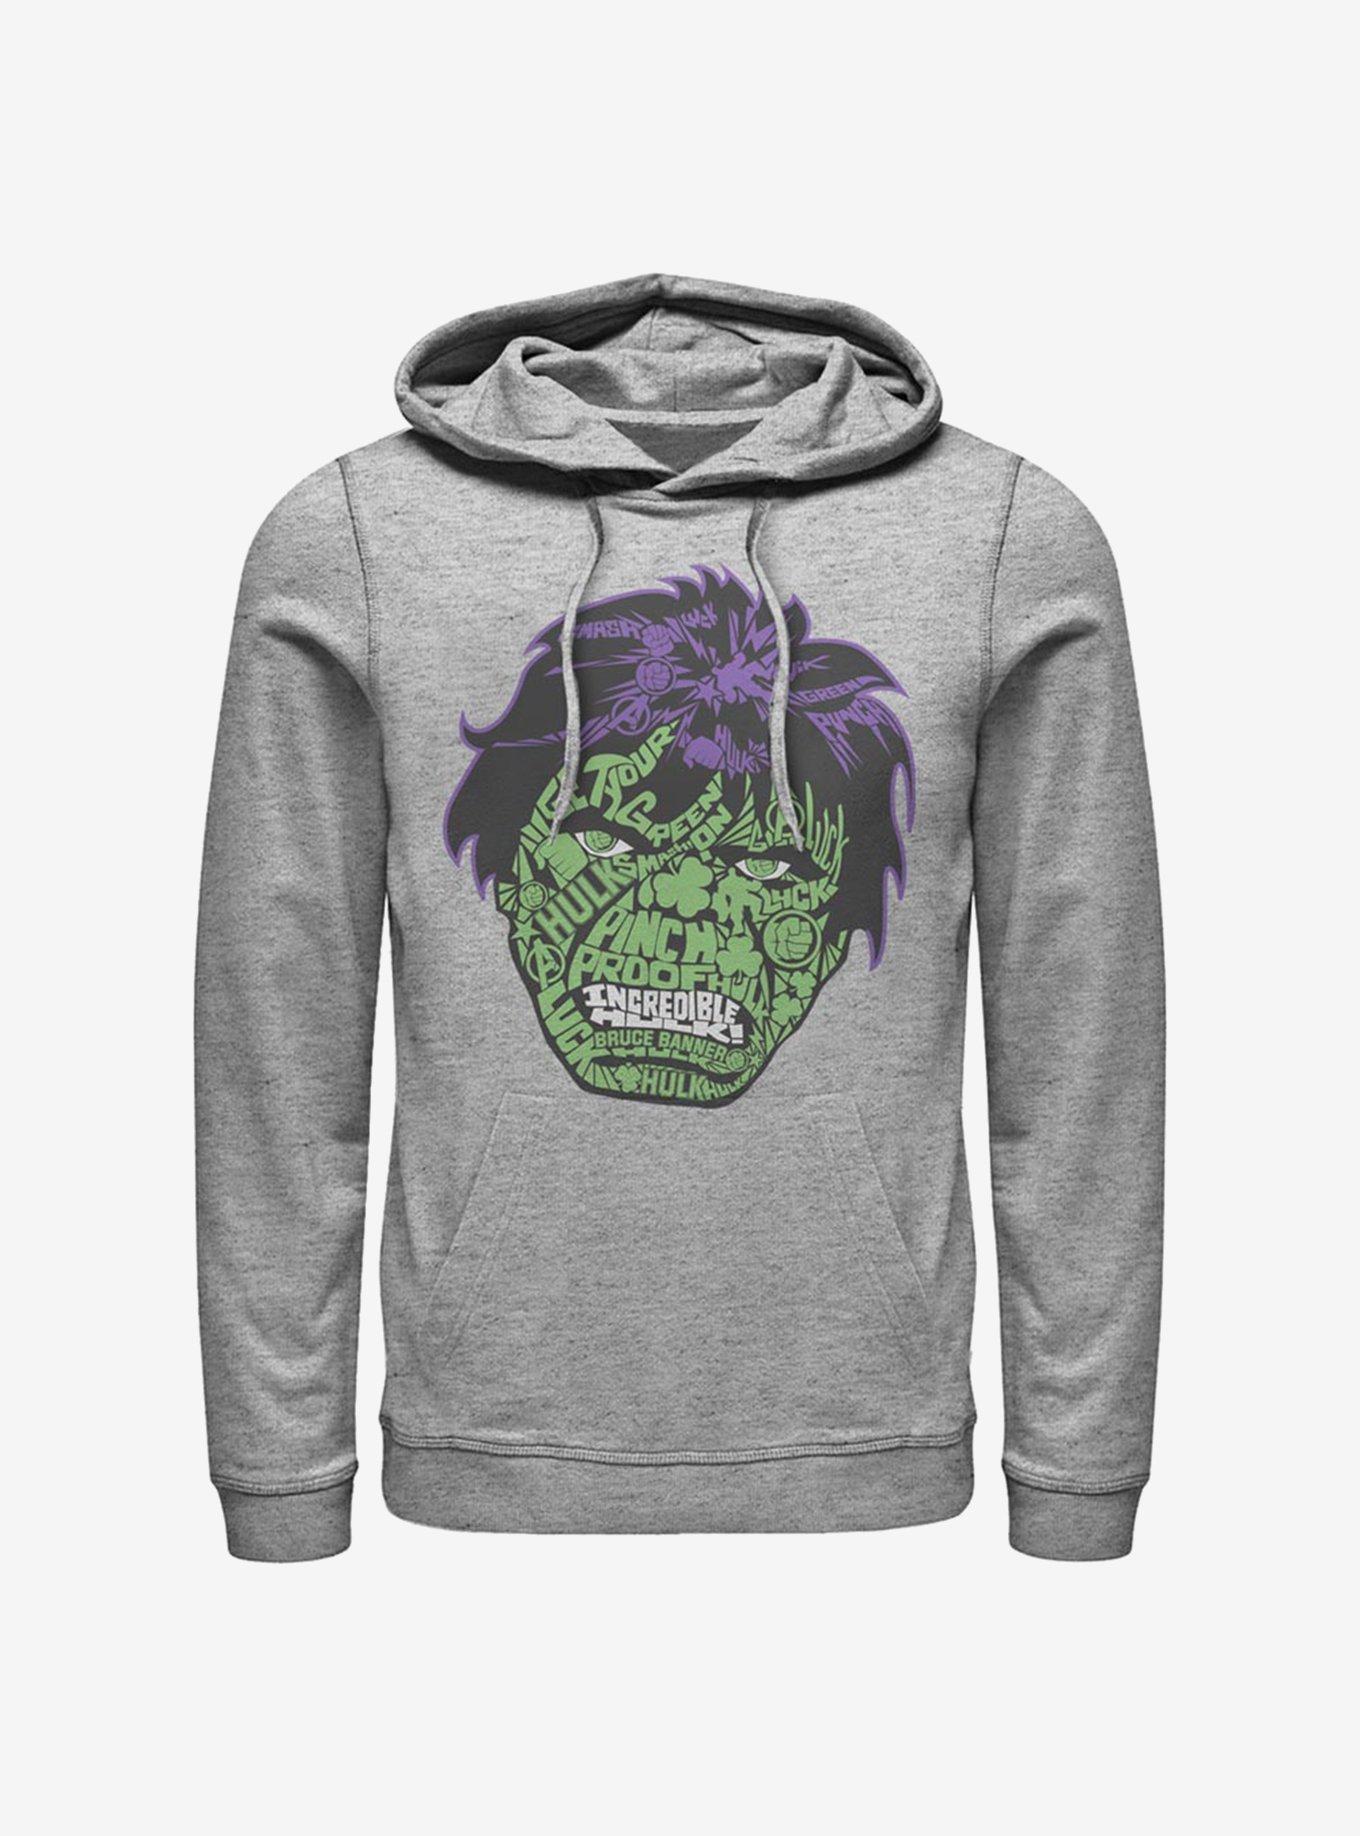 Marvel The Hulk Luck Icons Face Hoodie, ATH HTR, hi-res